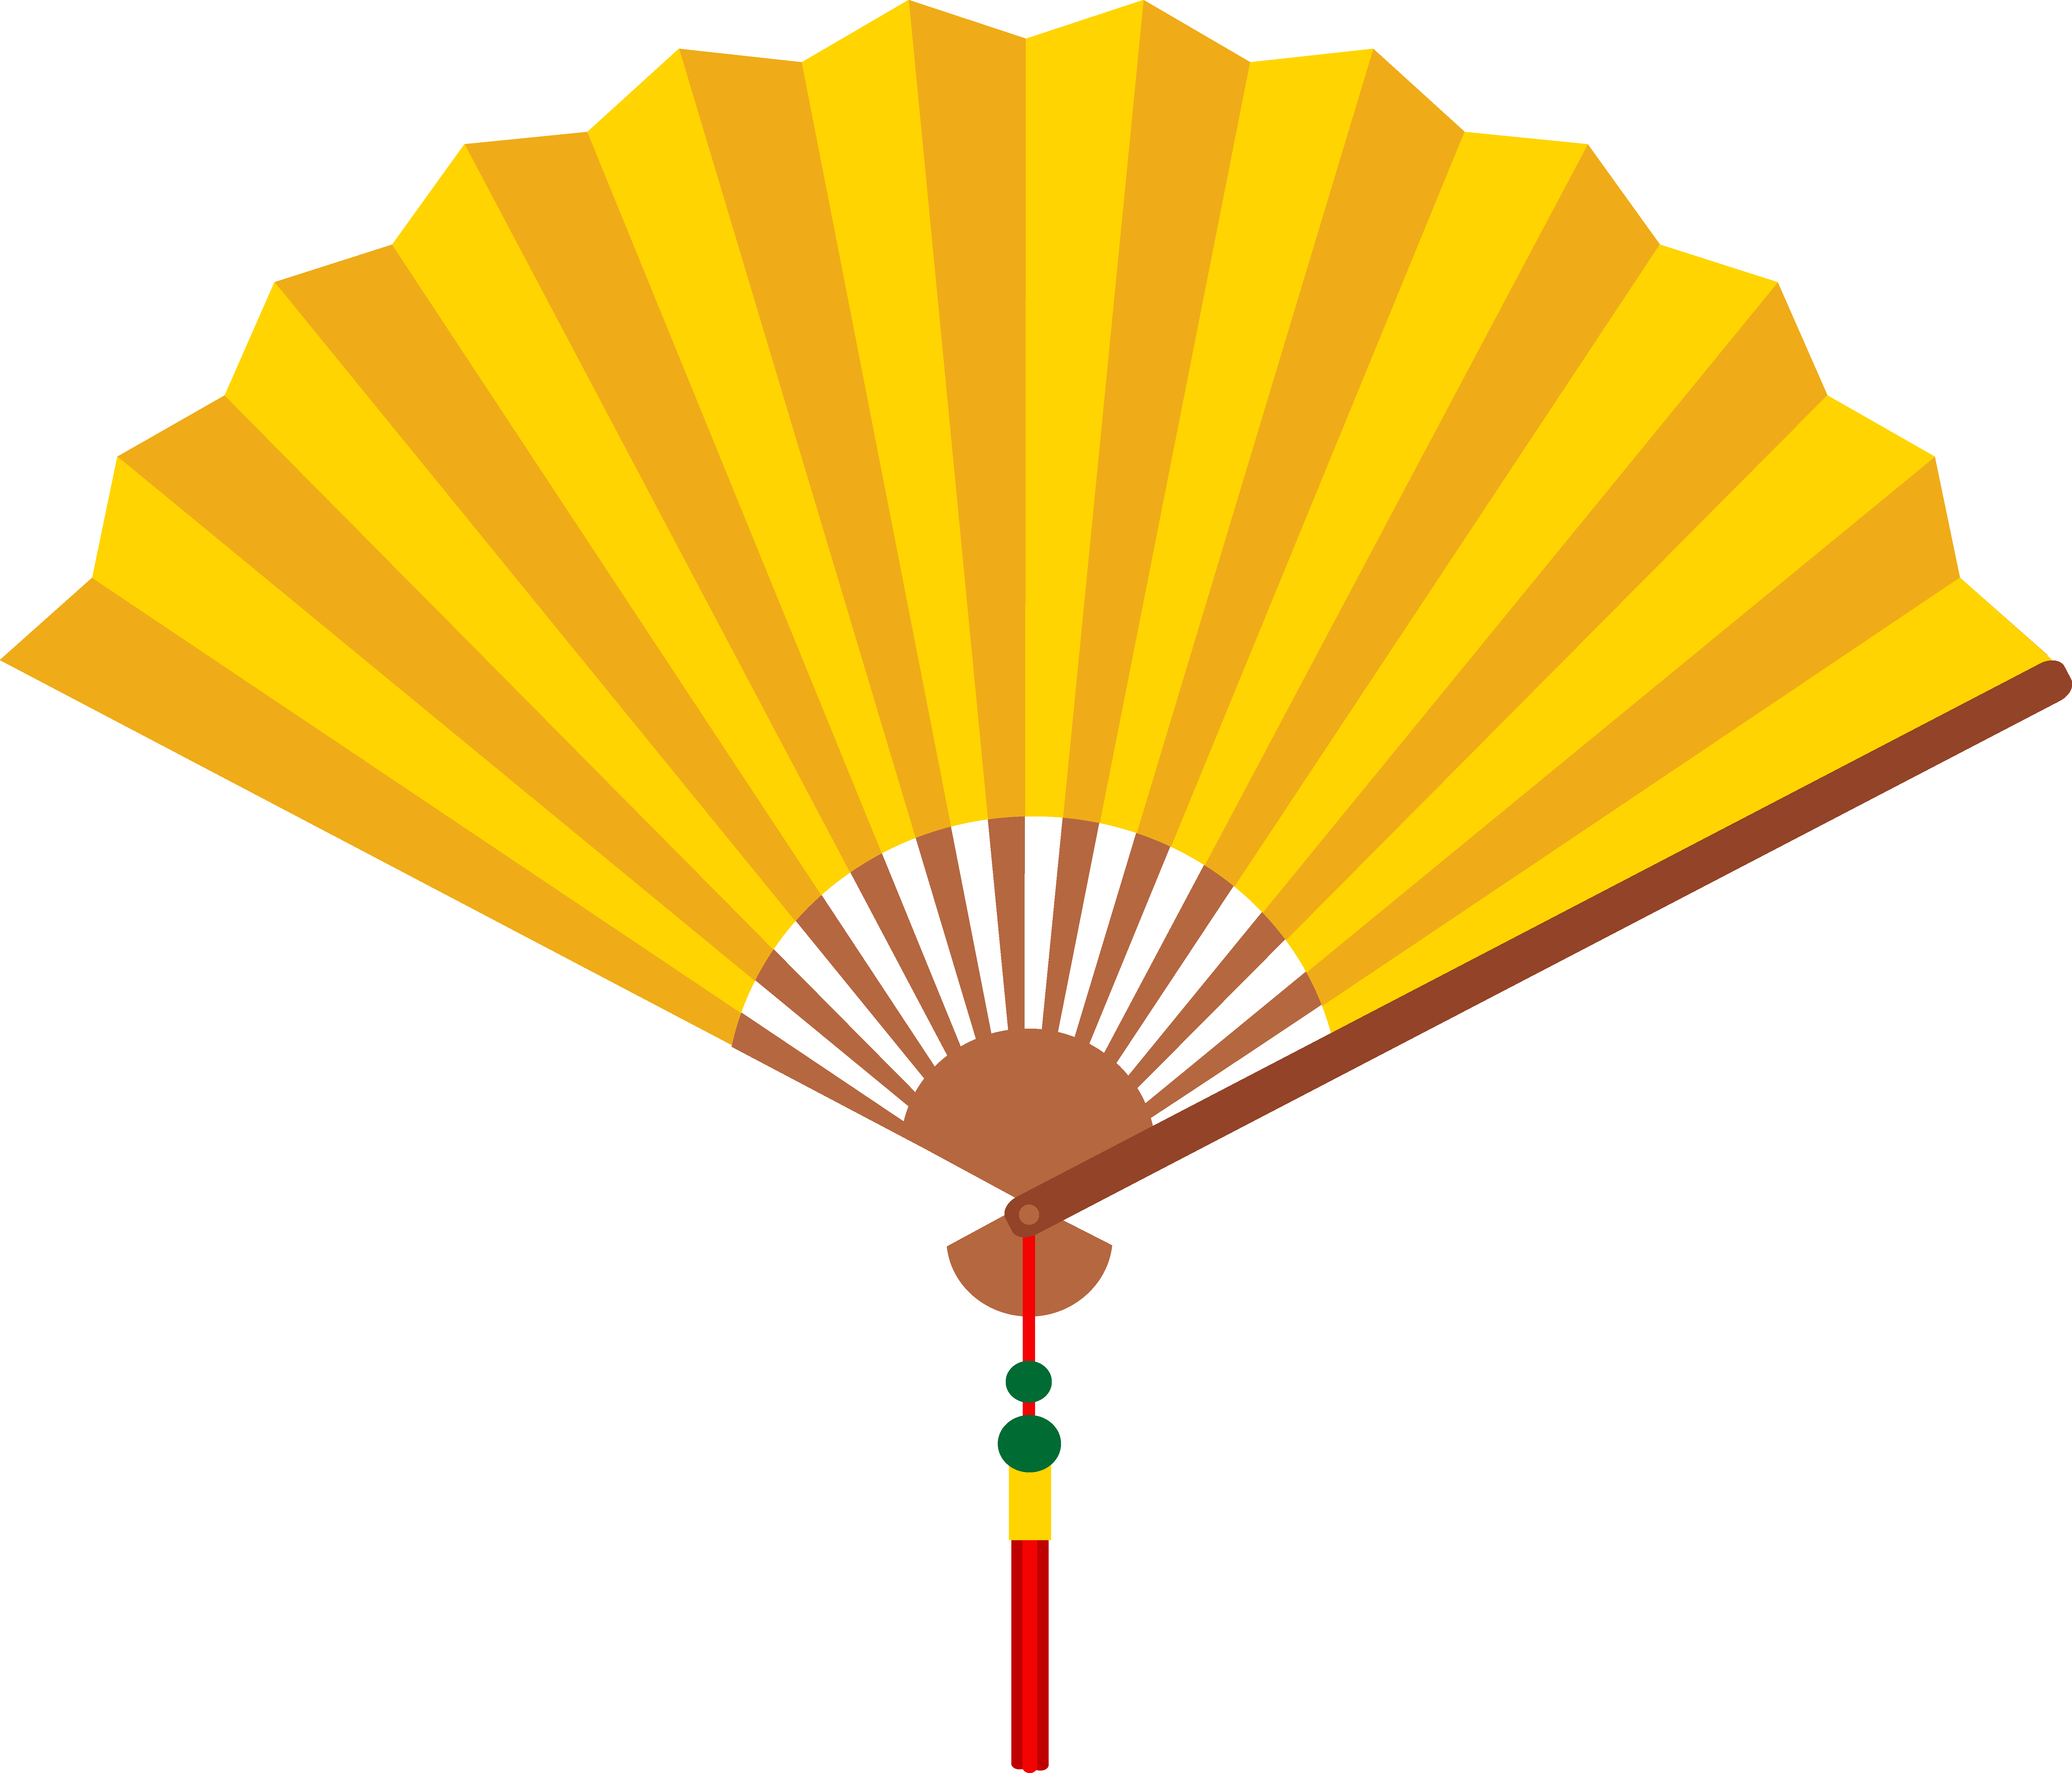 Chinese Clip Art - Hand Fan Cartoon - (6718x5750) Png Clipart Download. 